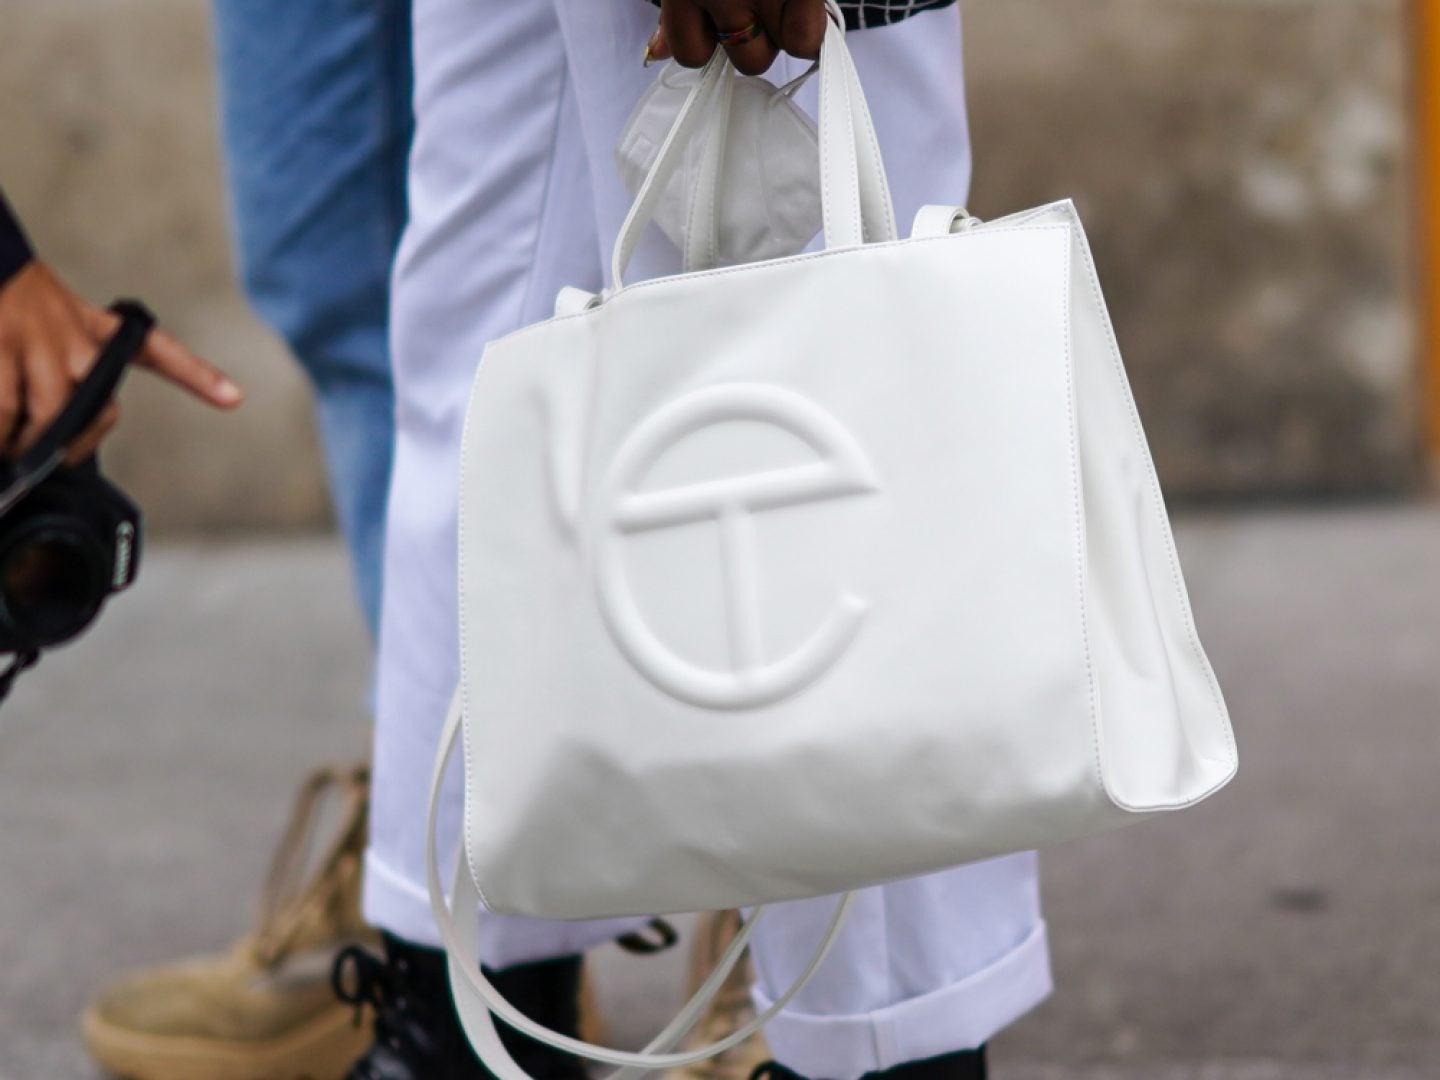 Telfar Supporters React After GUESS Pulls Alleged Knockoff Bag From Its' Shelves